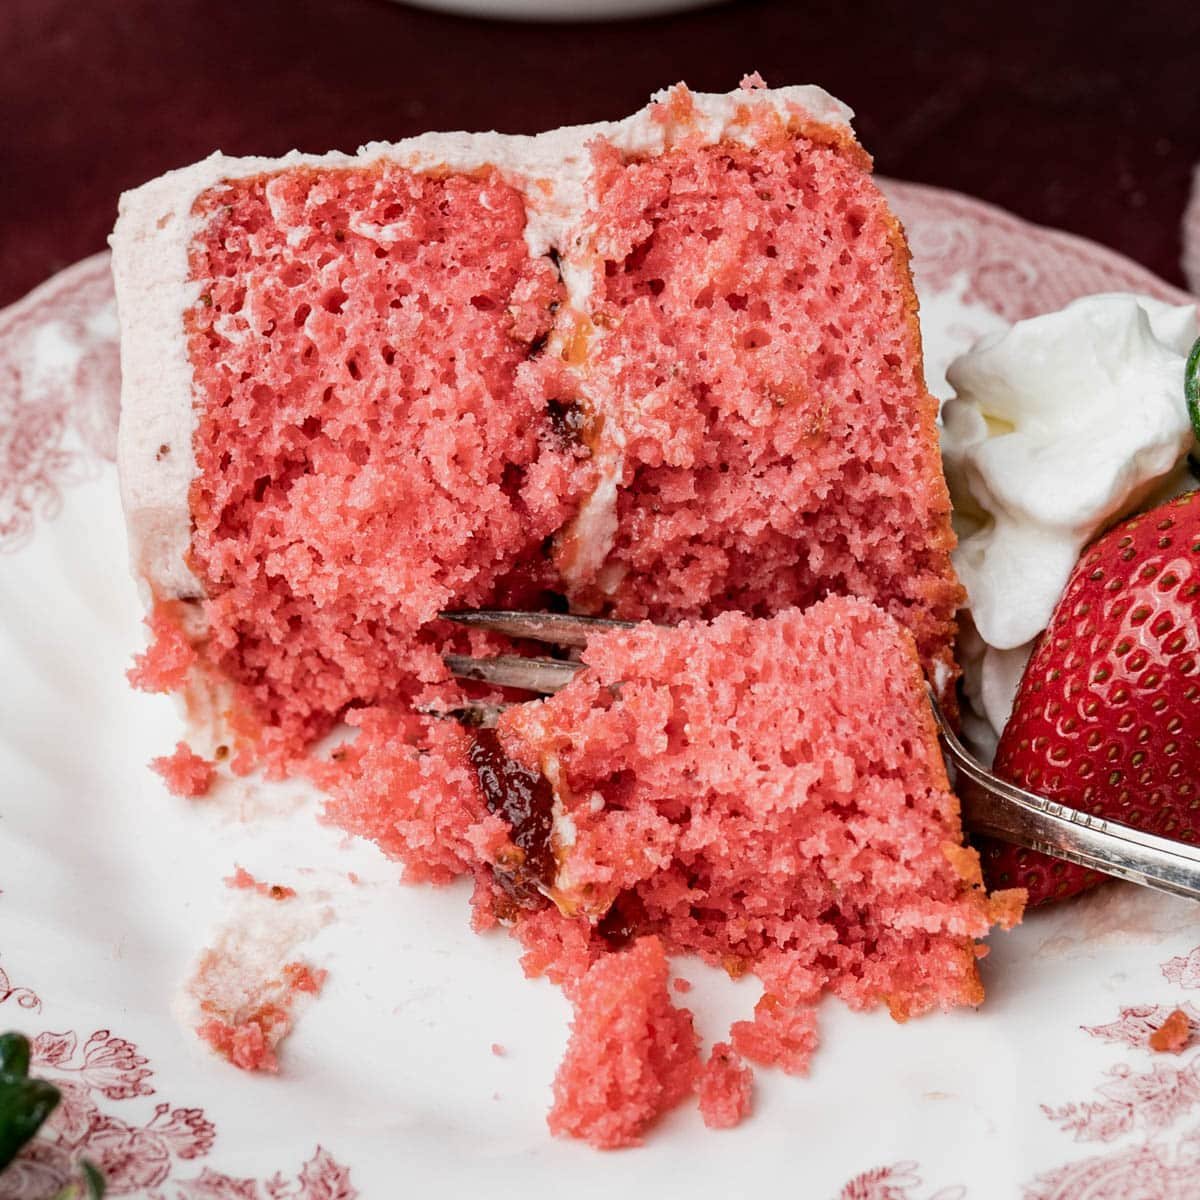 a slice of strawberry layer cake on a plate with a fork and bite out